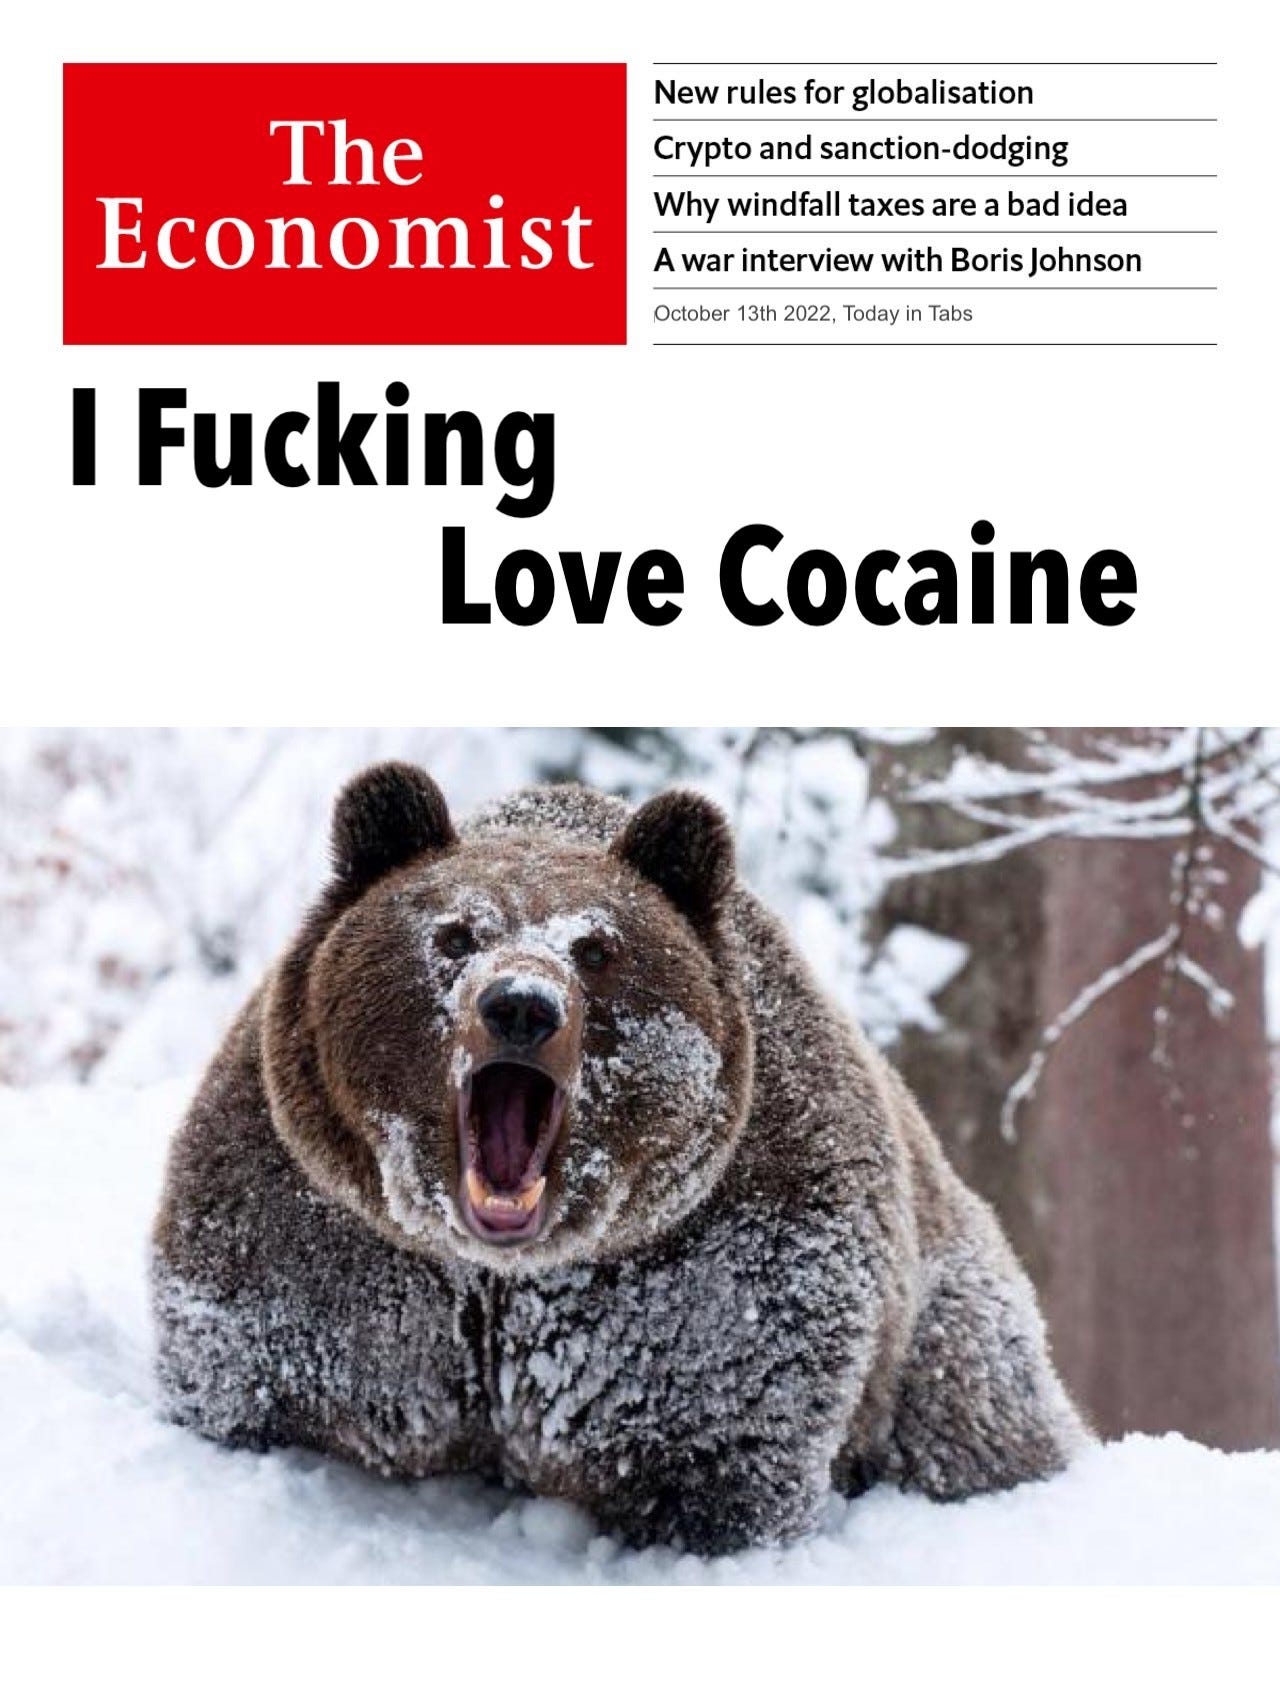 An Economist Magazine cover with the bold headline “I Fucking Love Cocaine” and a picture of the classic “I fucking love cocaine” meme bear.